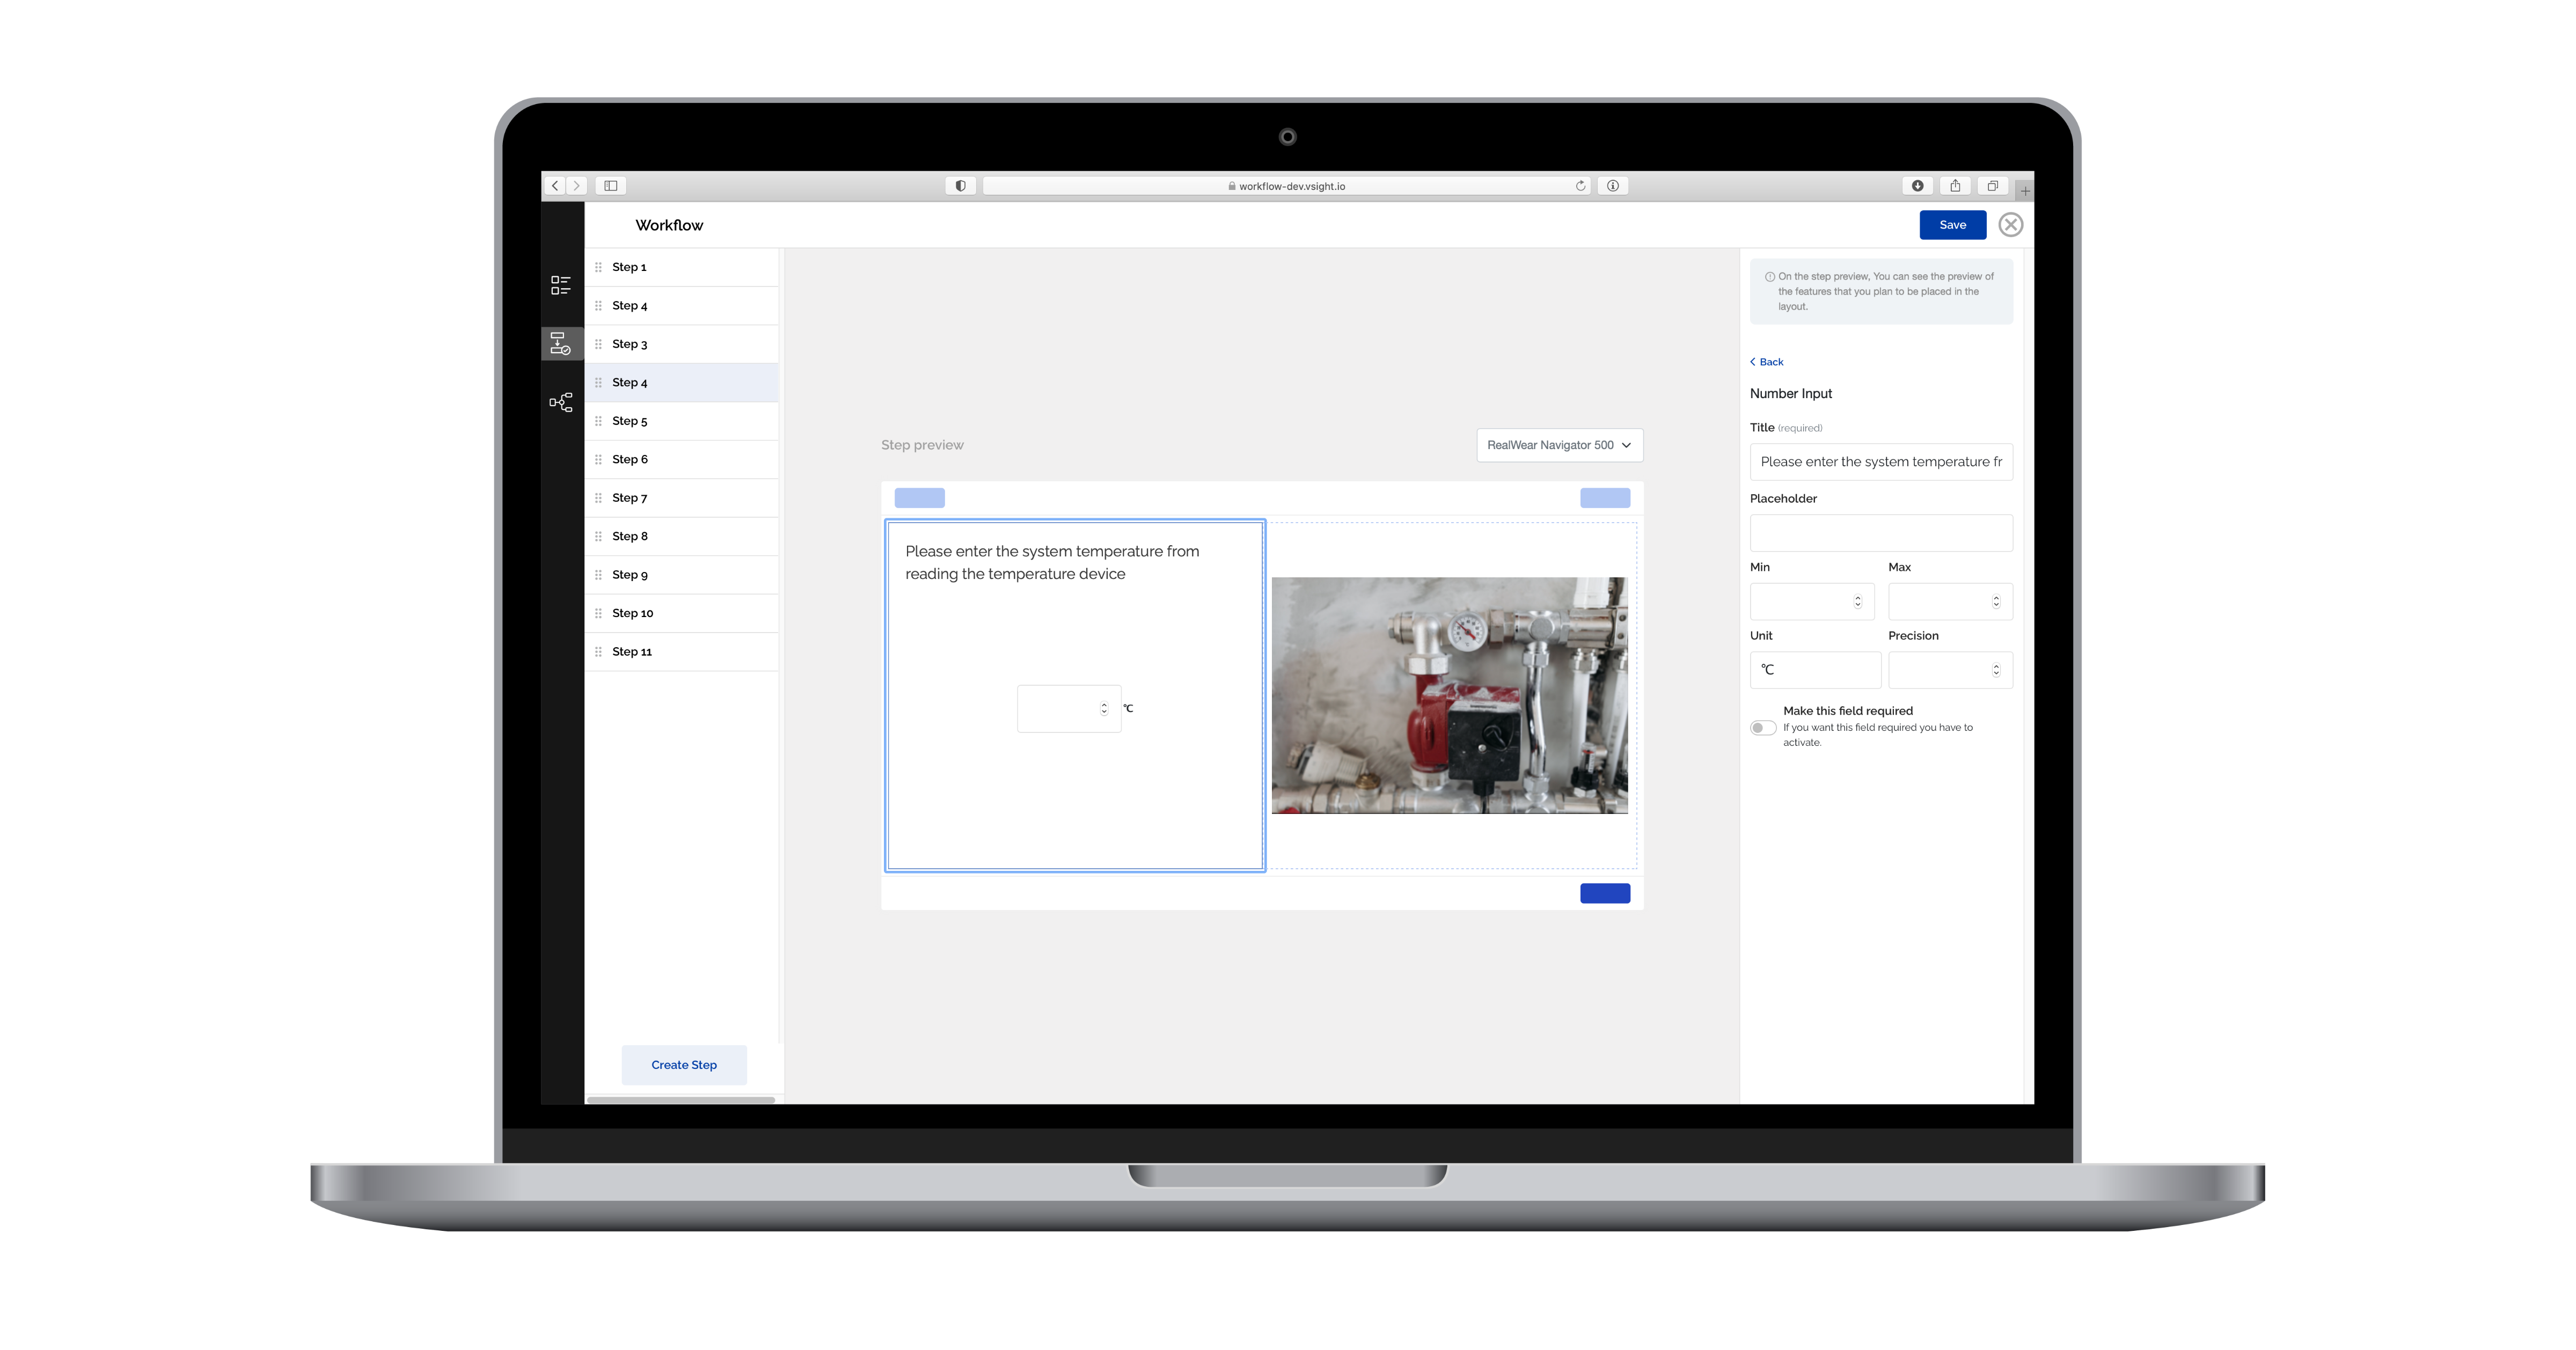 Create step-by-step, flexible workflows with if-then branches using instructions in various formats like text, image, voice, video with an easy-to-use drag and drop editor and preview before you deploy on all connected devices.